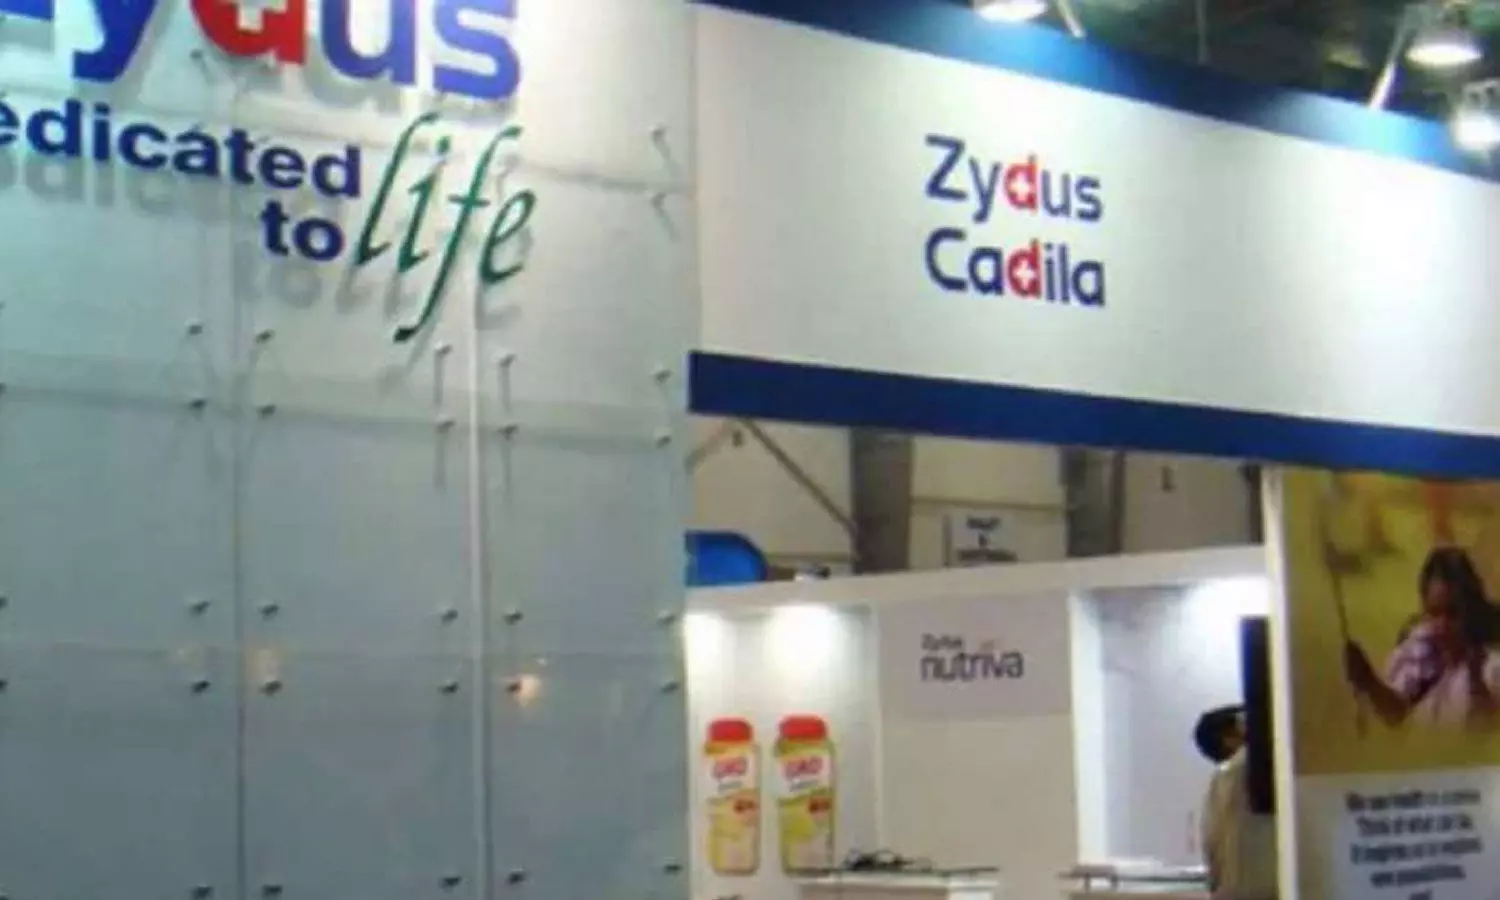 COVID-19: Zydus Cadila gets DCGI nod to start phase 3 trials with Pegylated Interferon alpha-2b in India